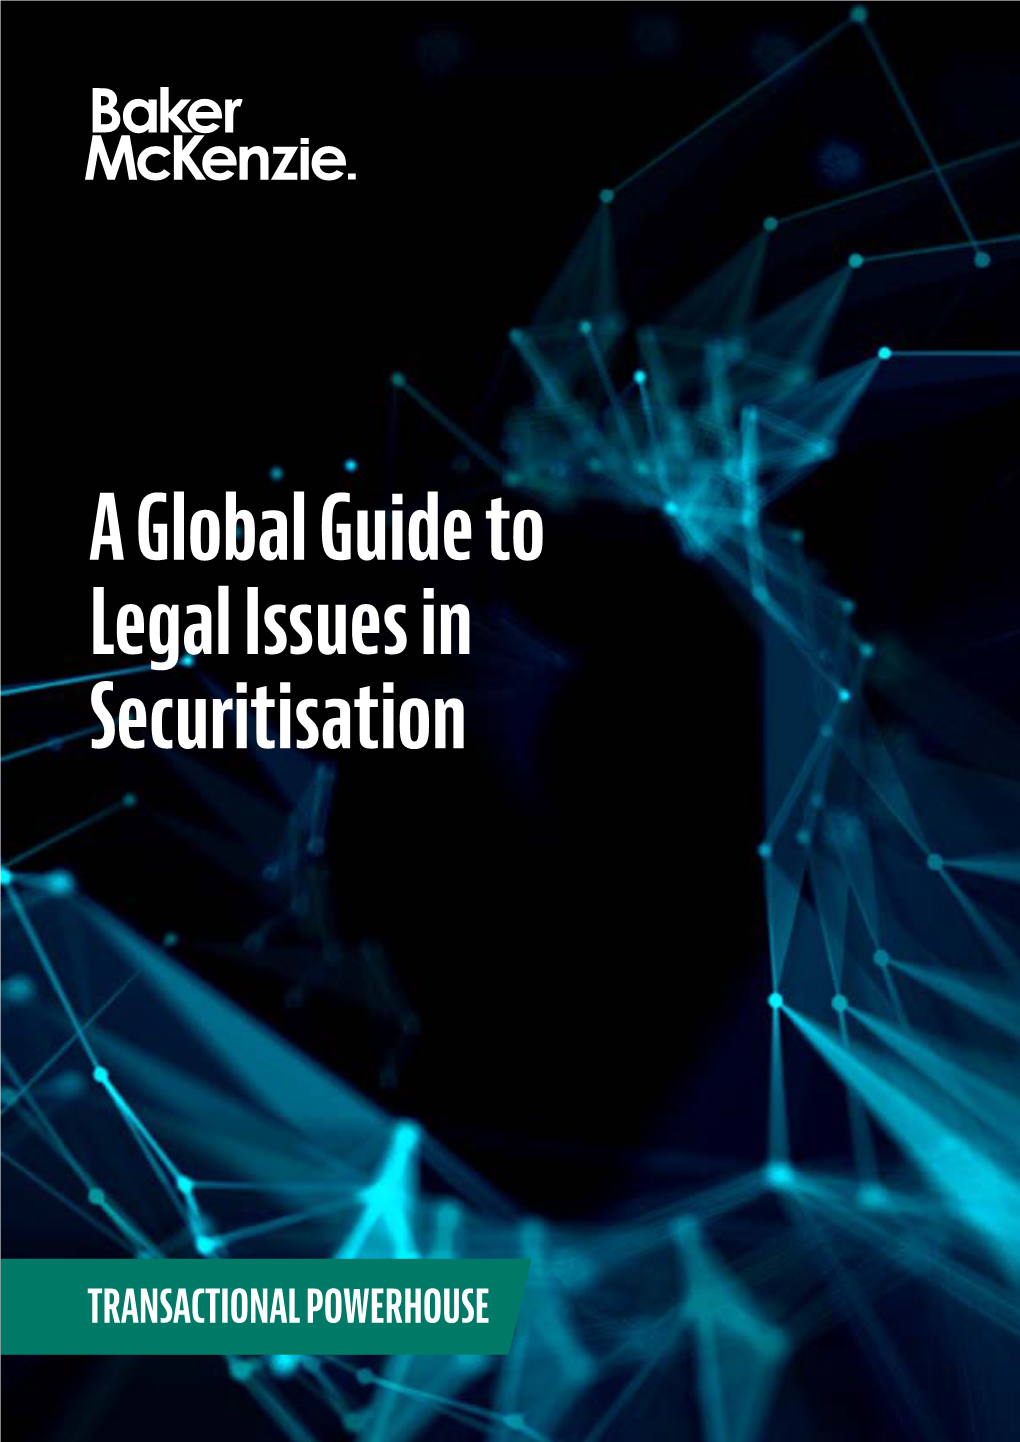 A Global Guide to Legal Issues in Securitisation